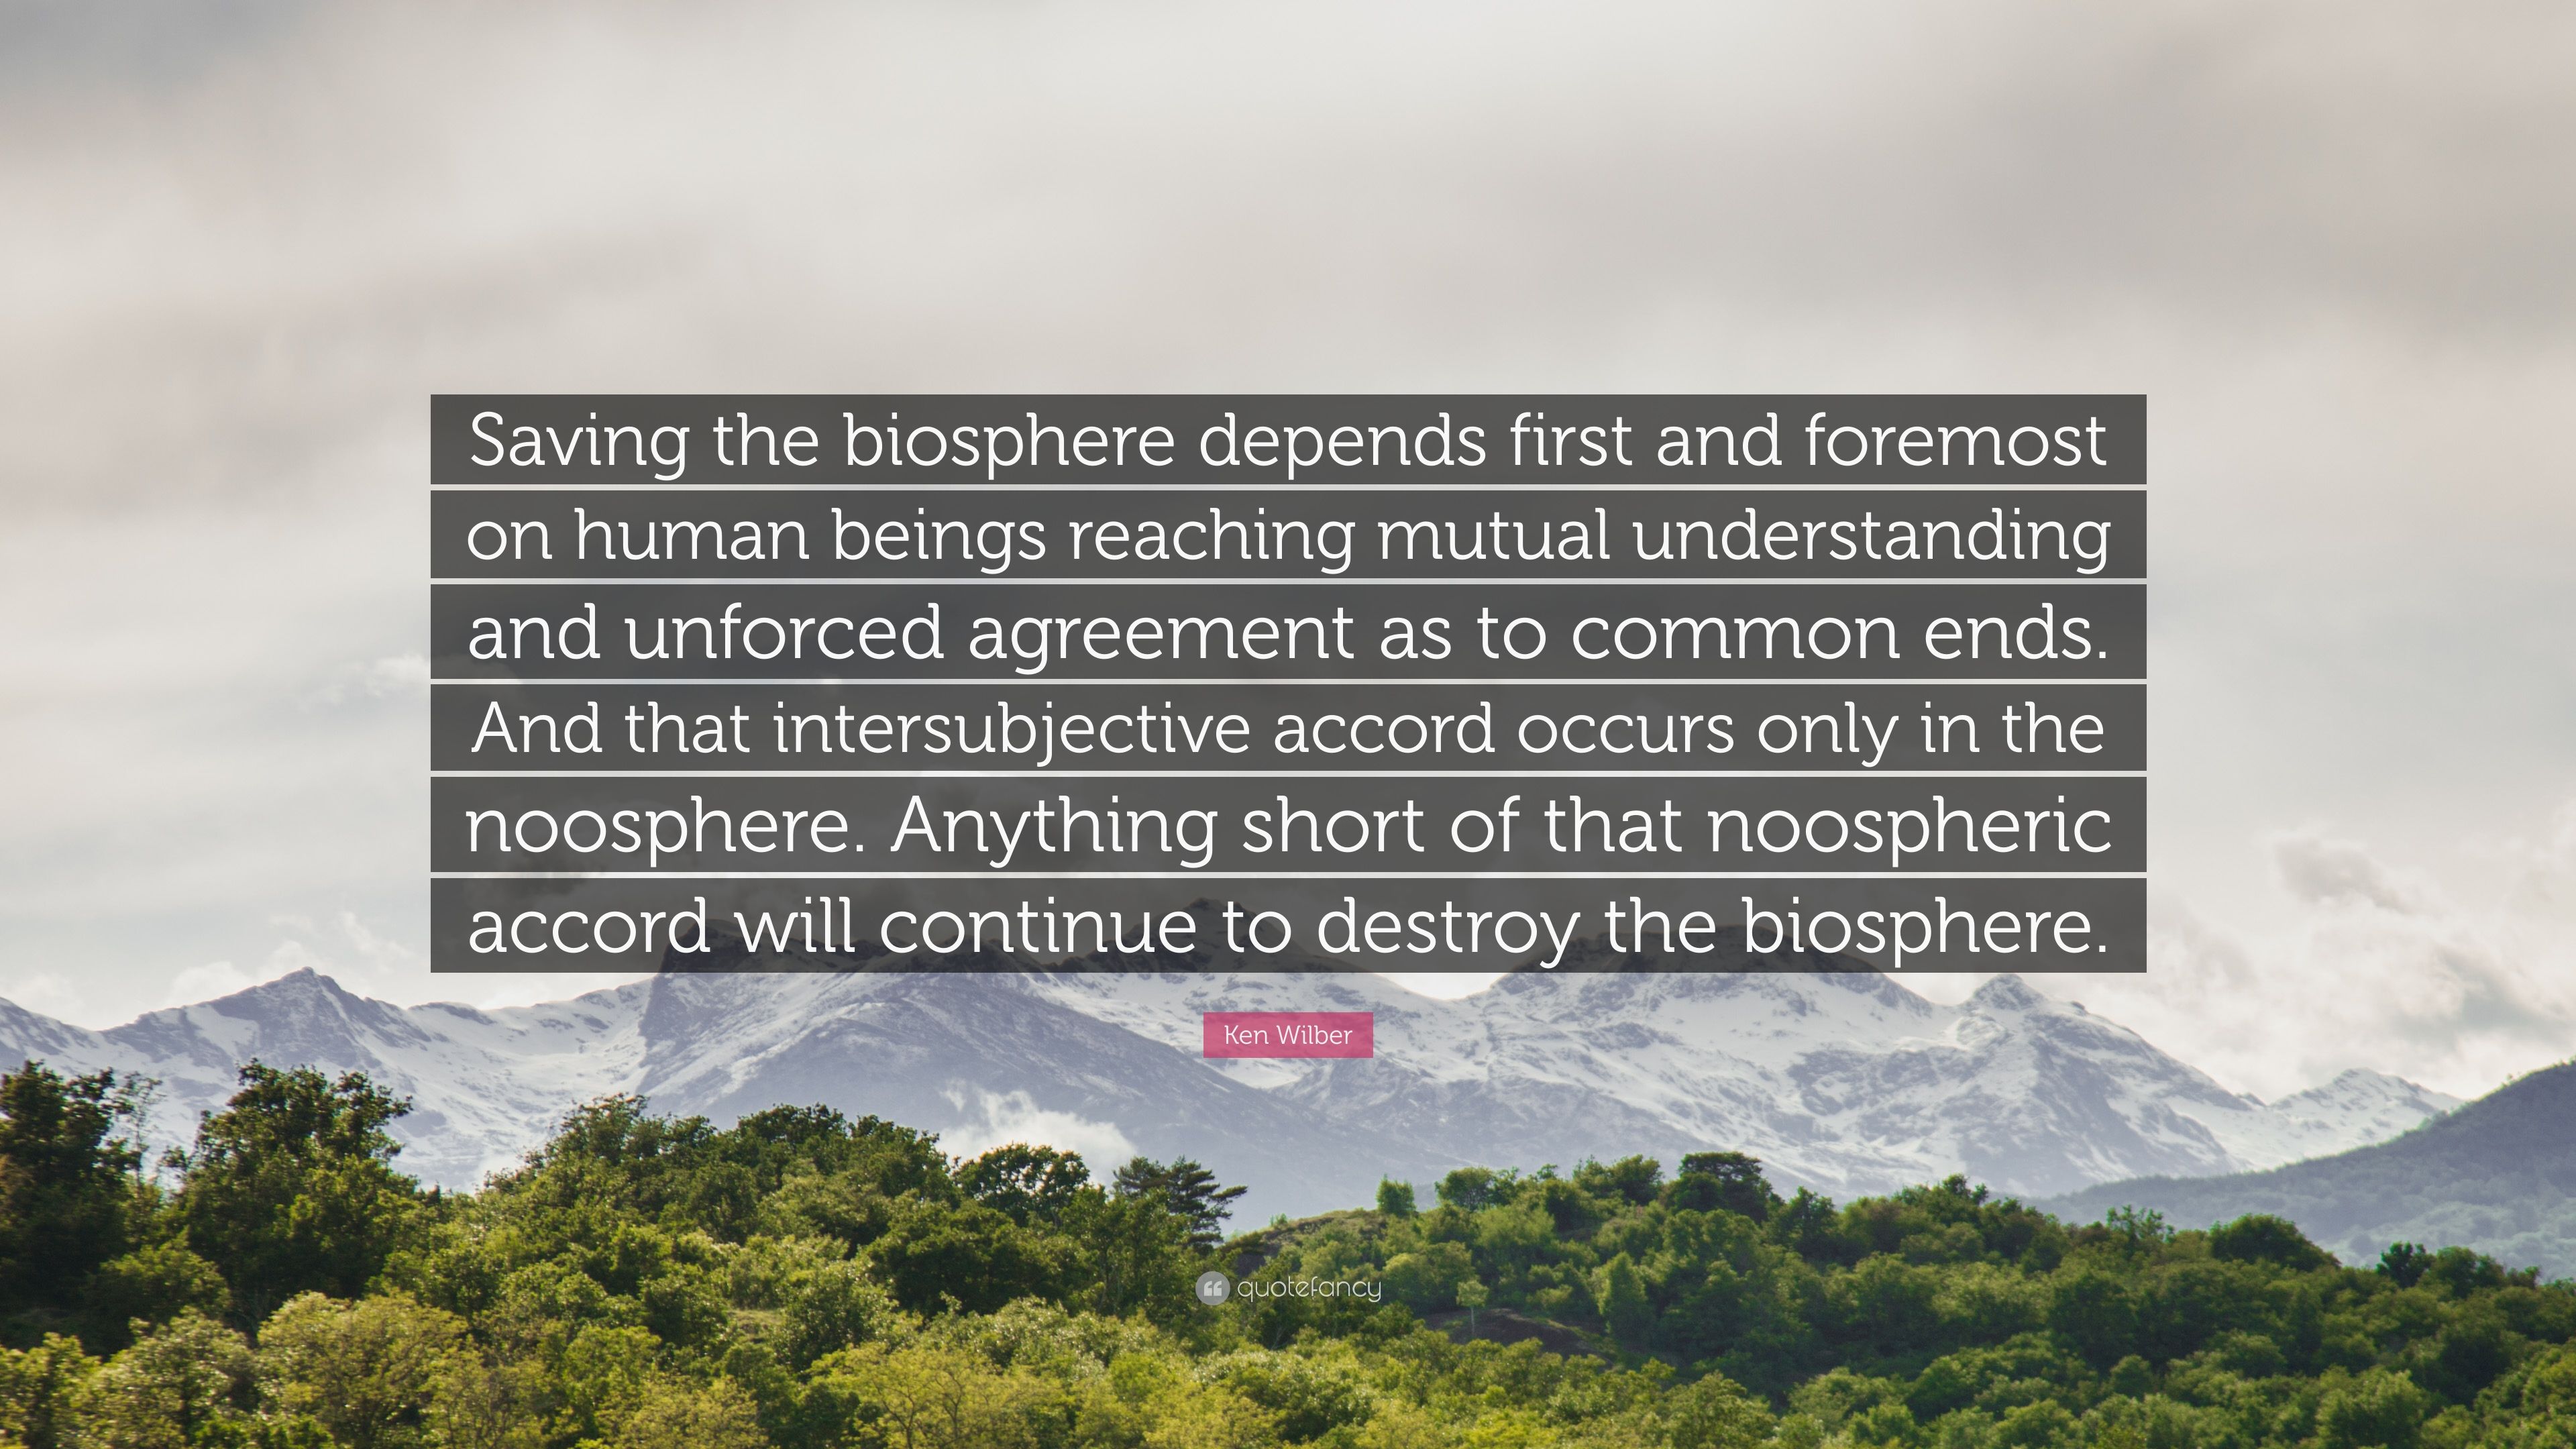 Ken Wilber Quote: “Saving the biosphere depends first and foremost on human beings reaching mutual understanding and unforced agreement as .”